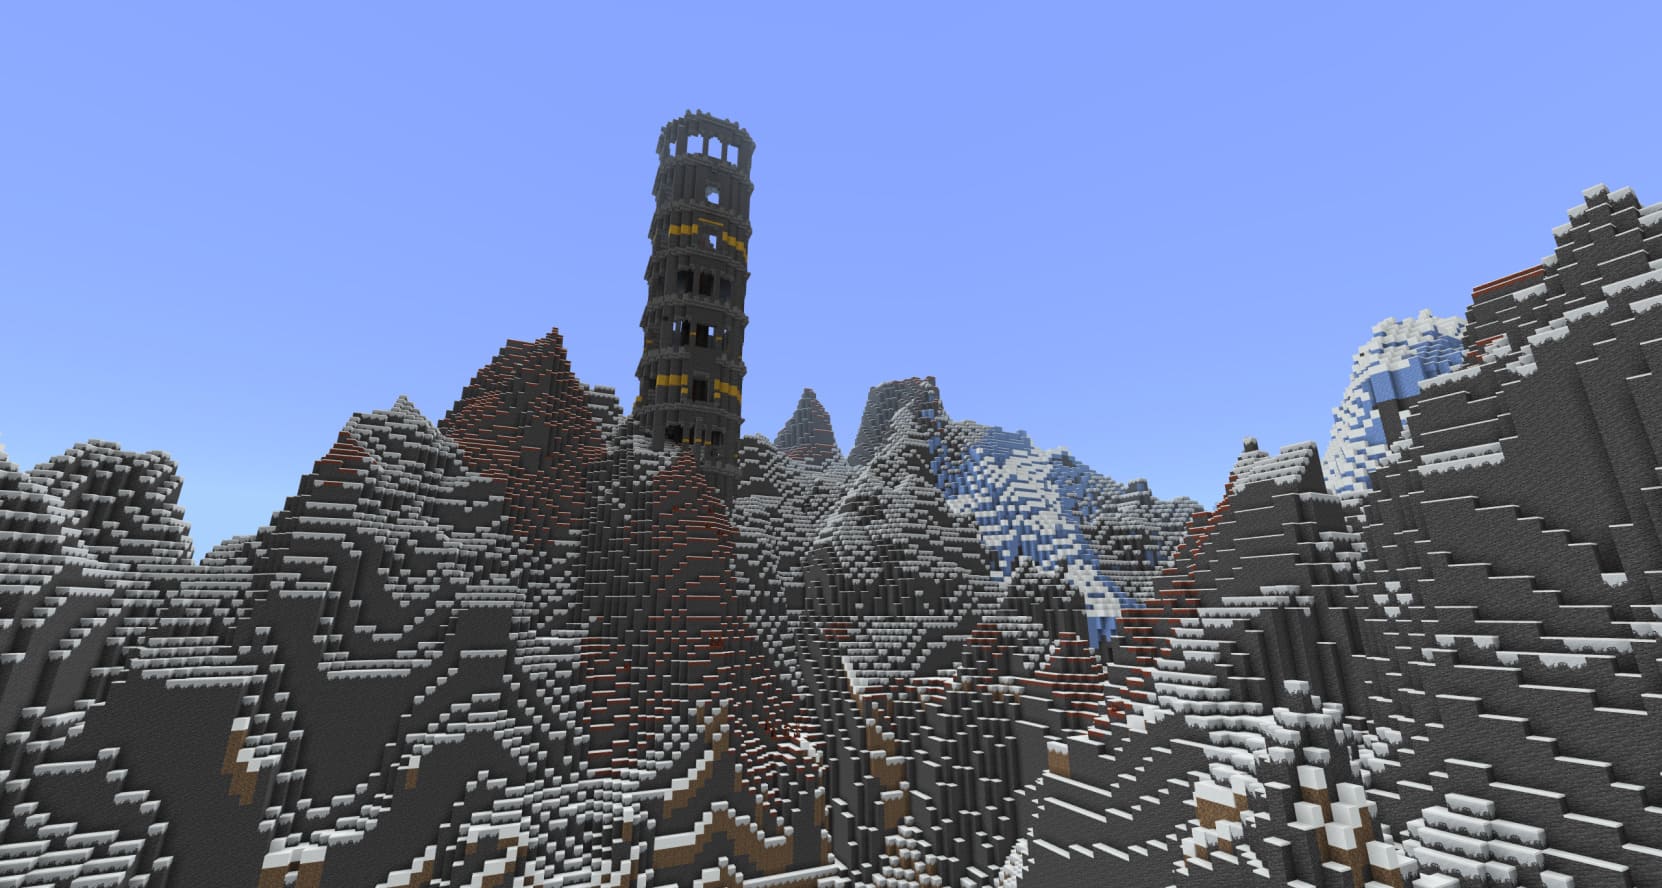 Fortress rubble in Minecraft